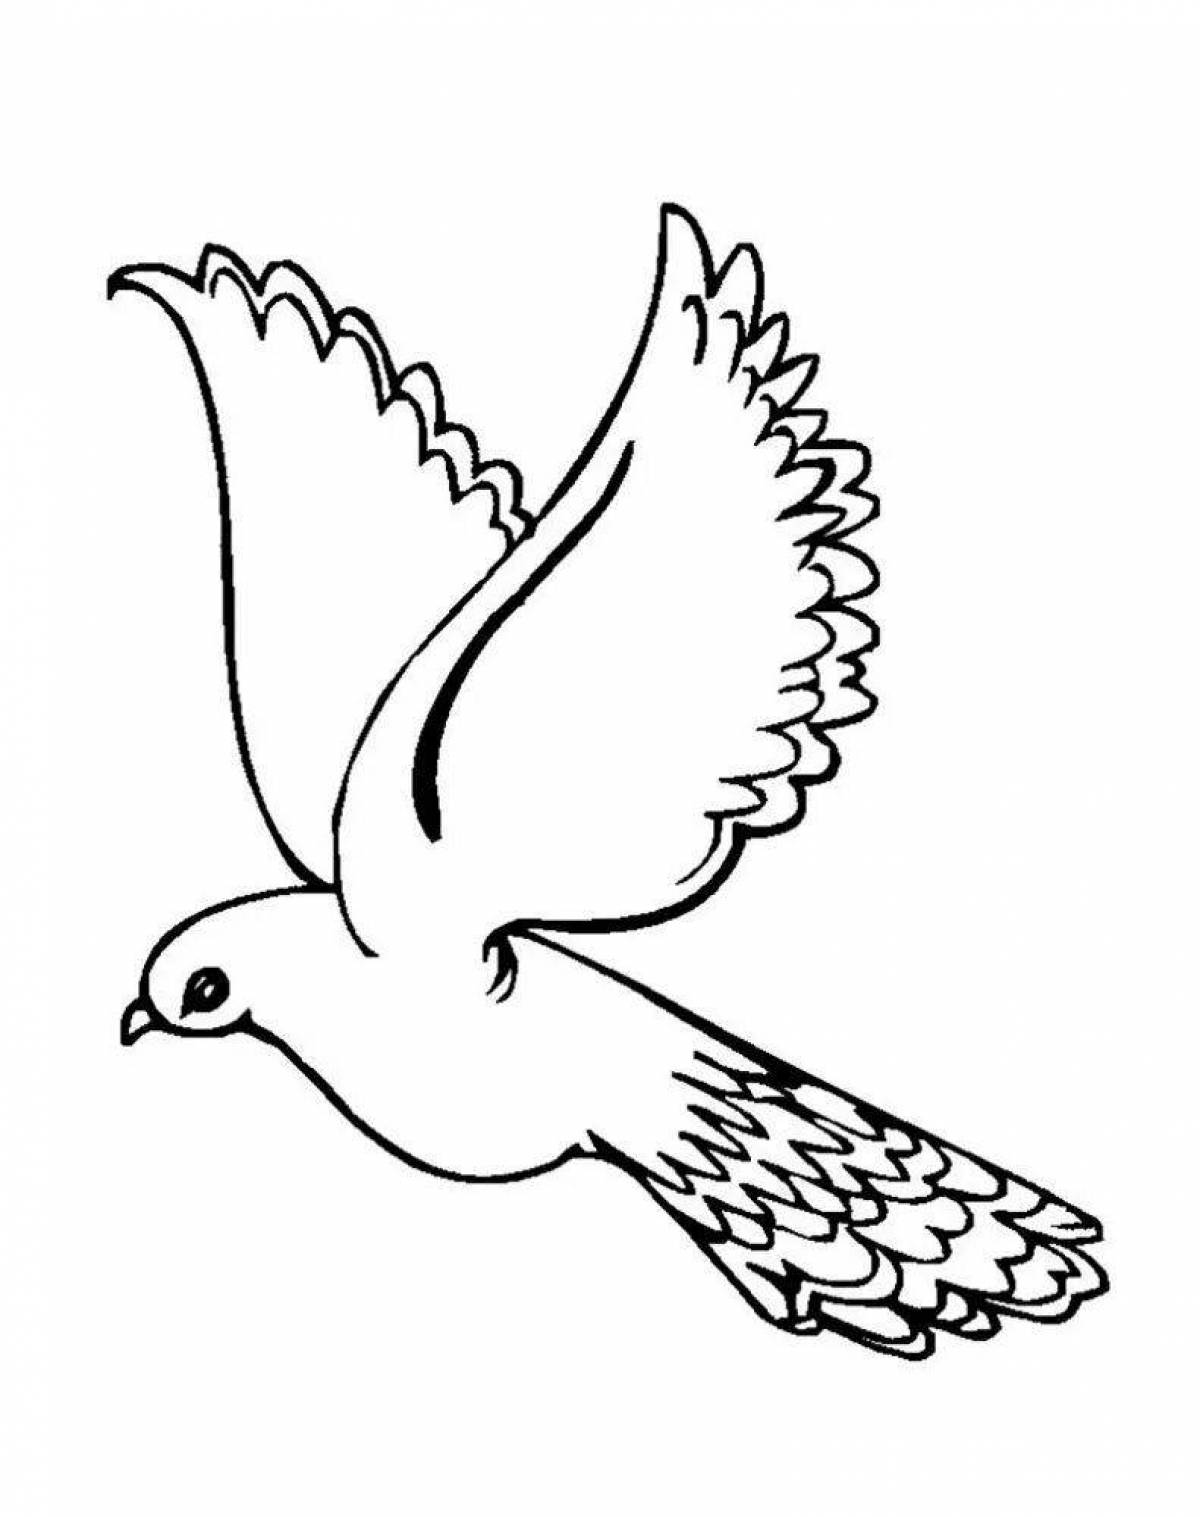 Exalted dove coloring page